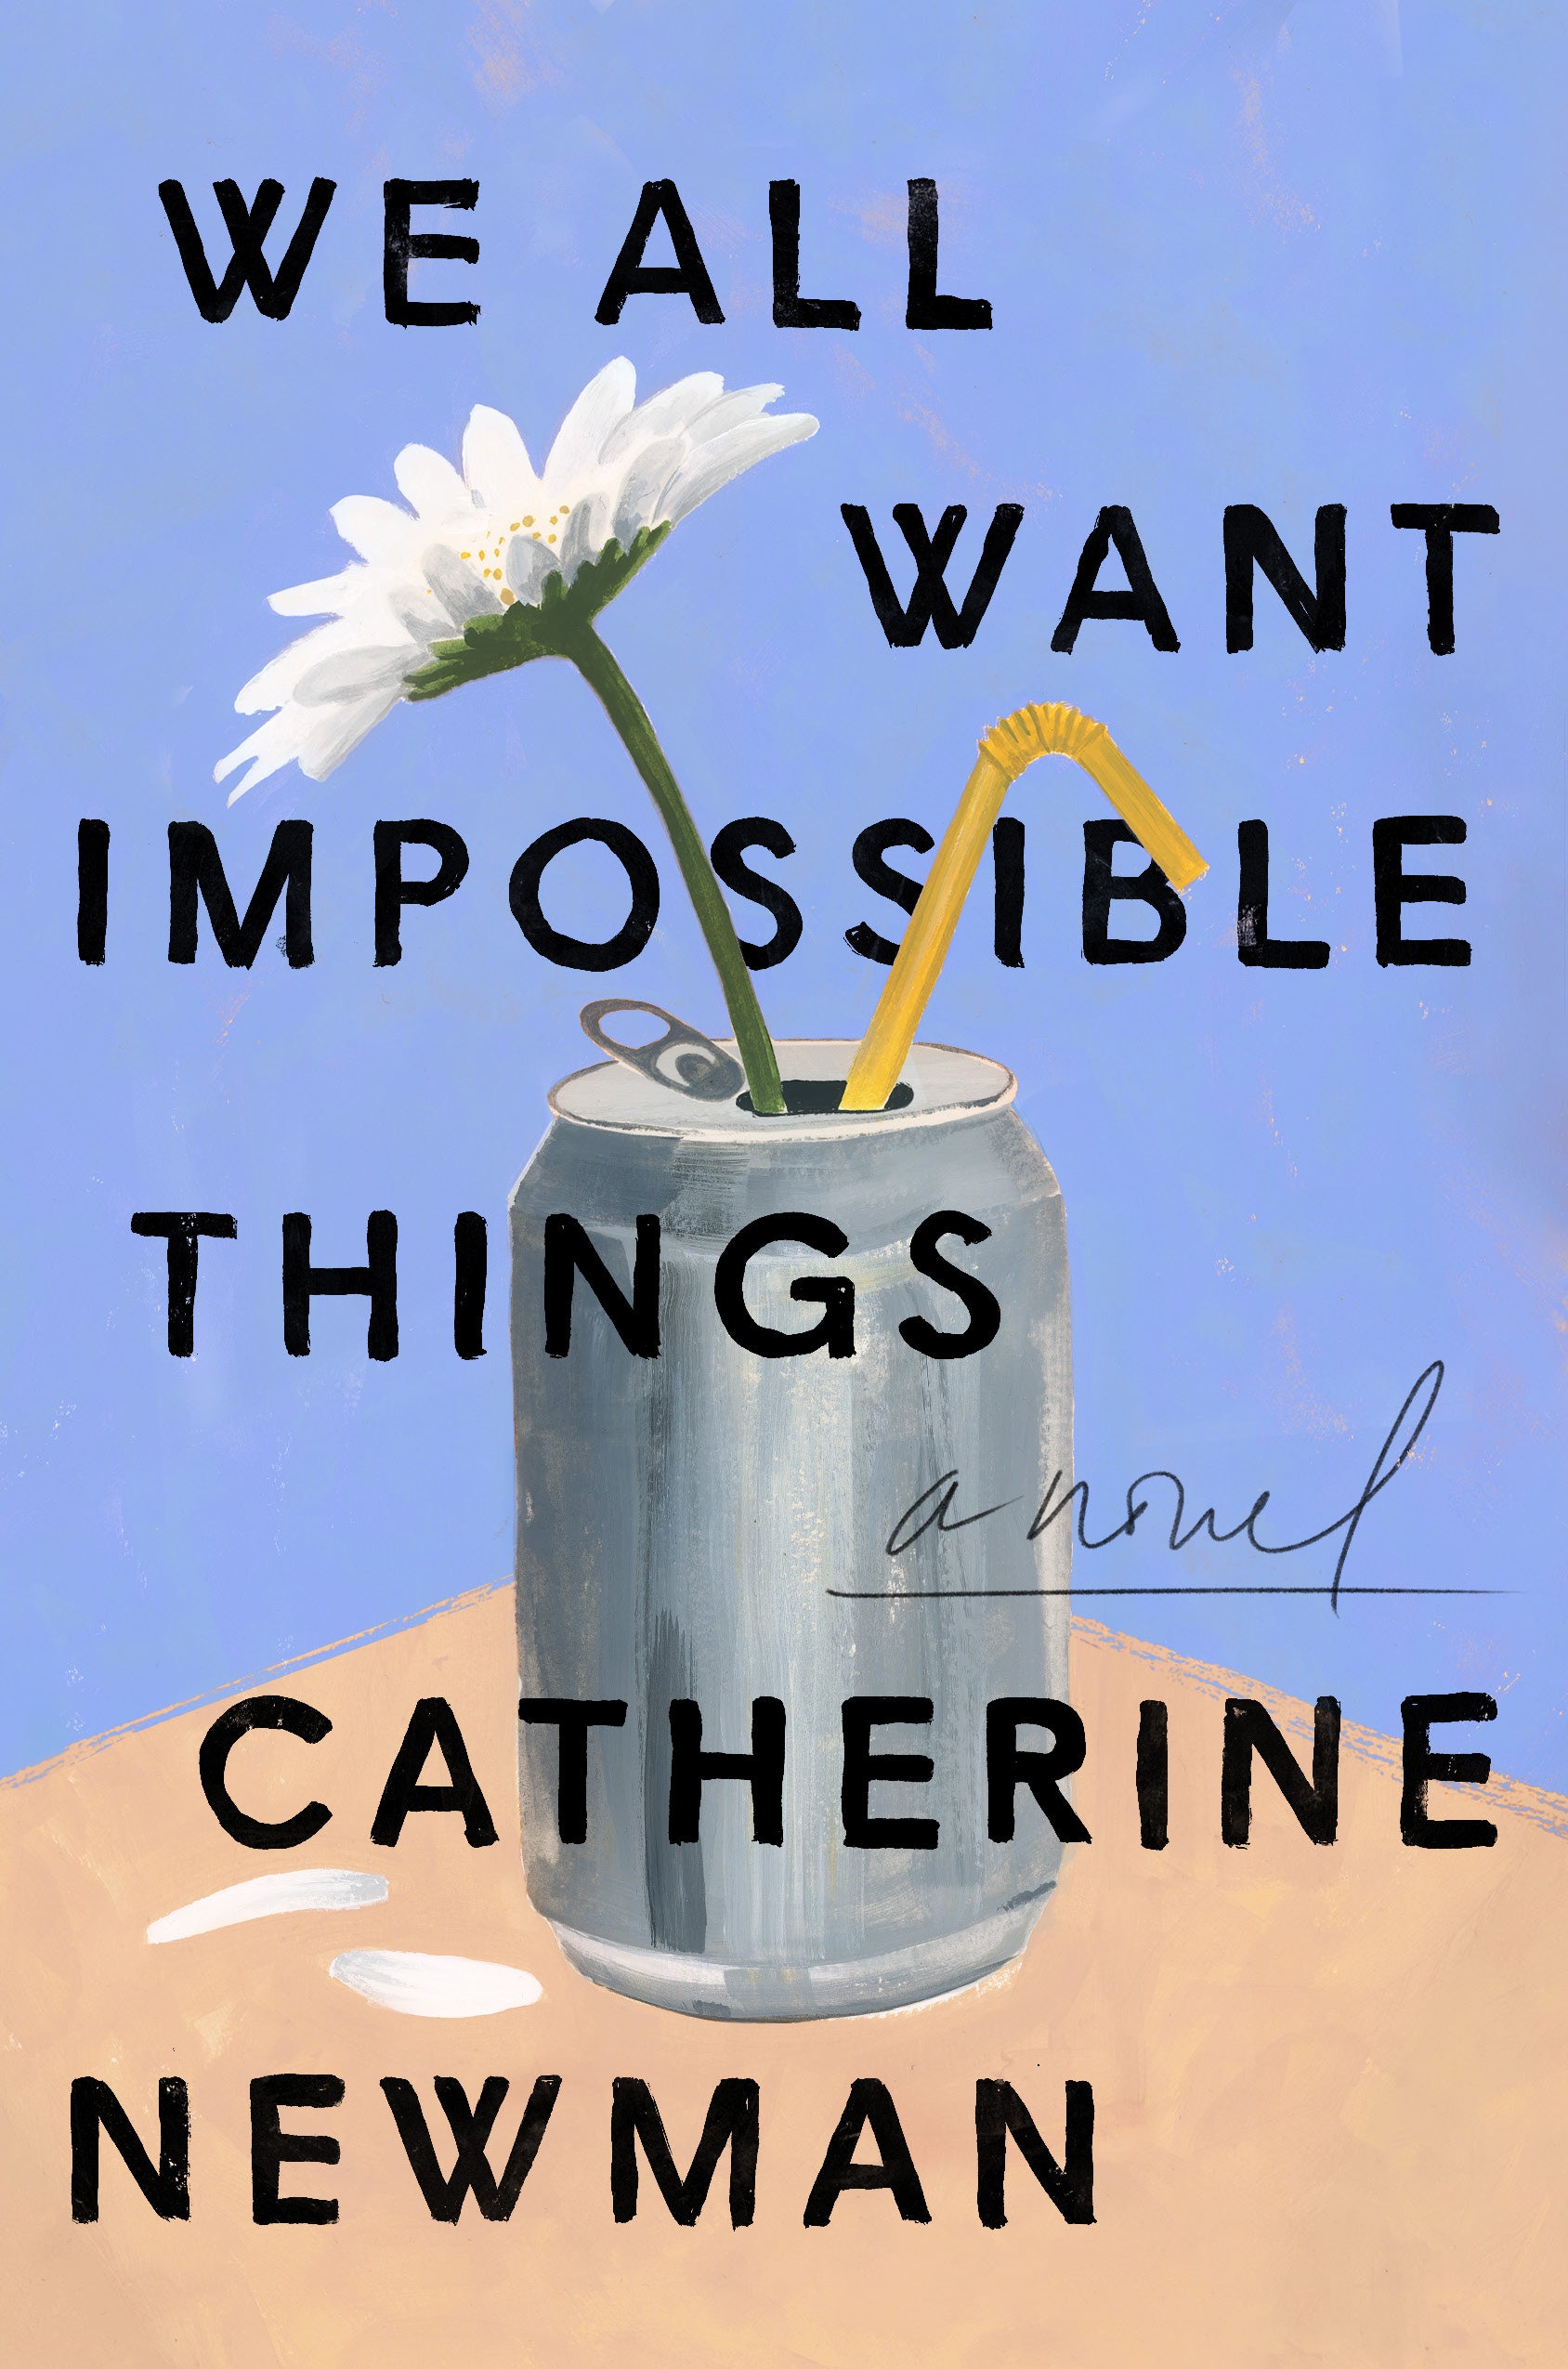 Catherine Newman talks about her novel "We All Want Impossible Things"